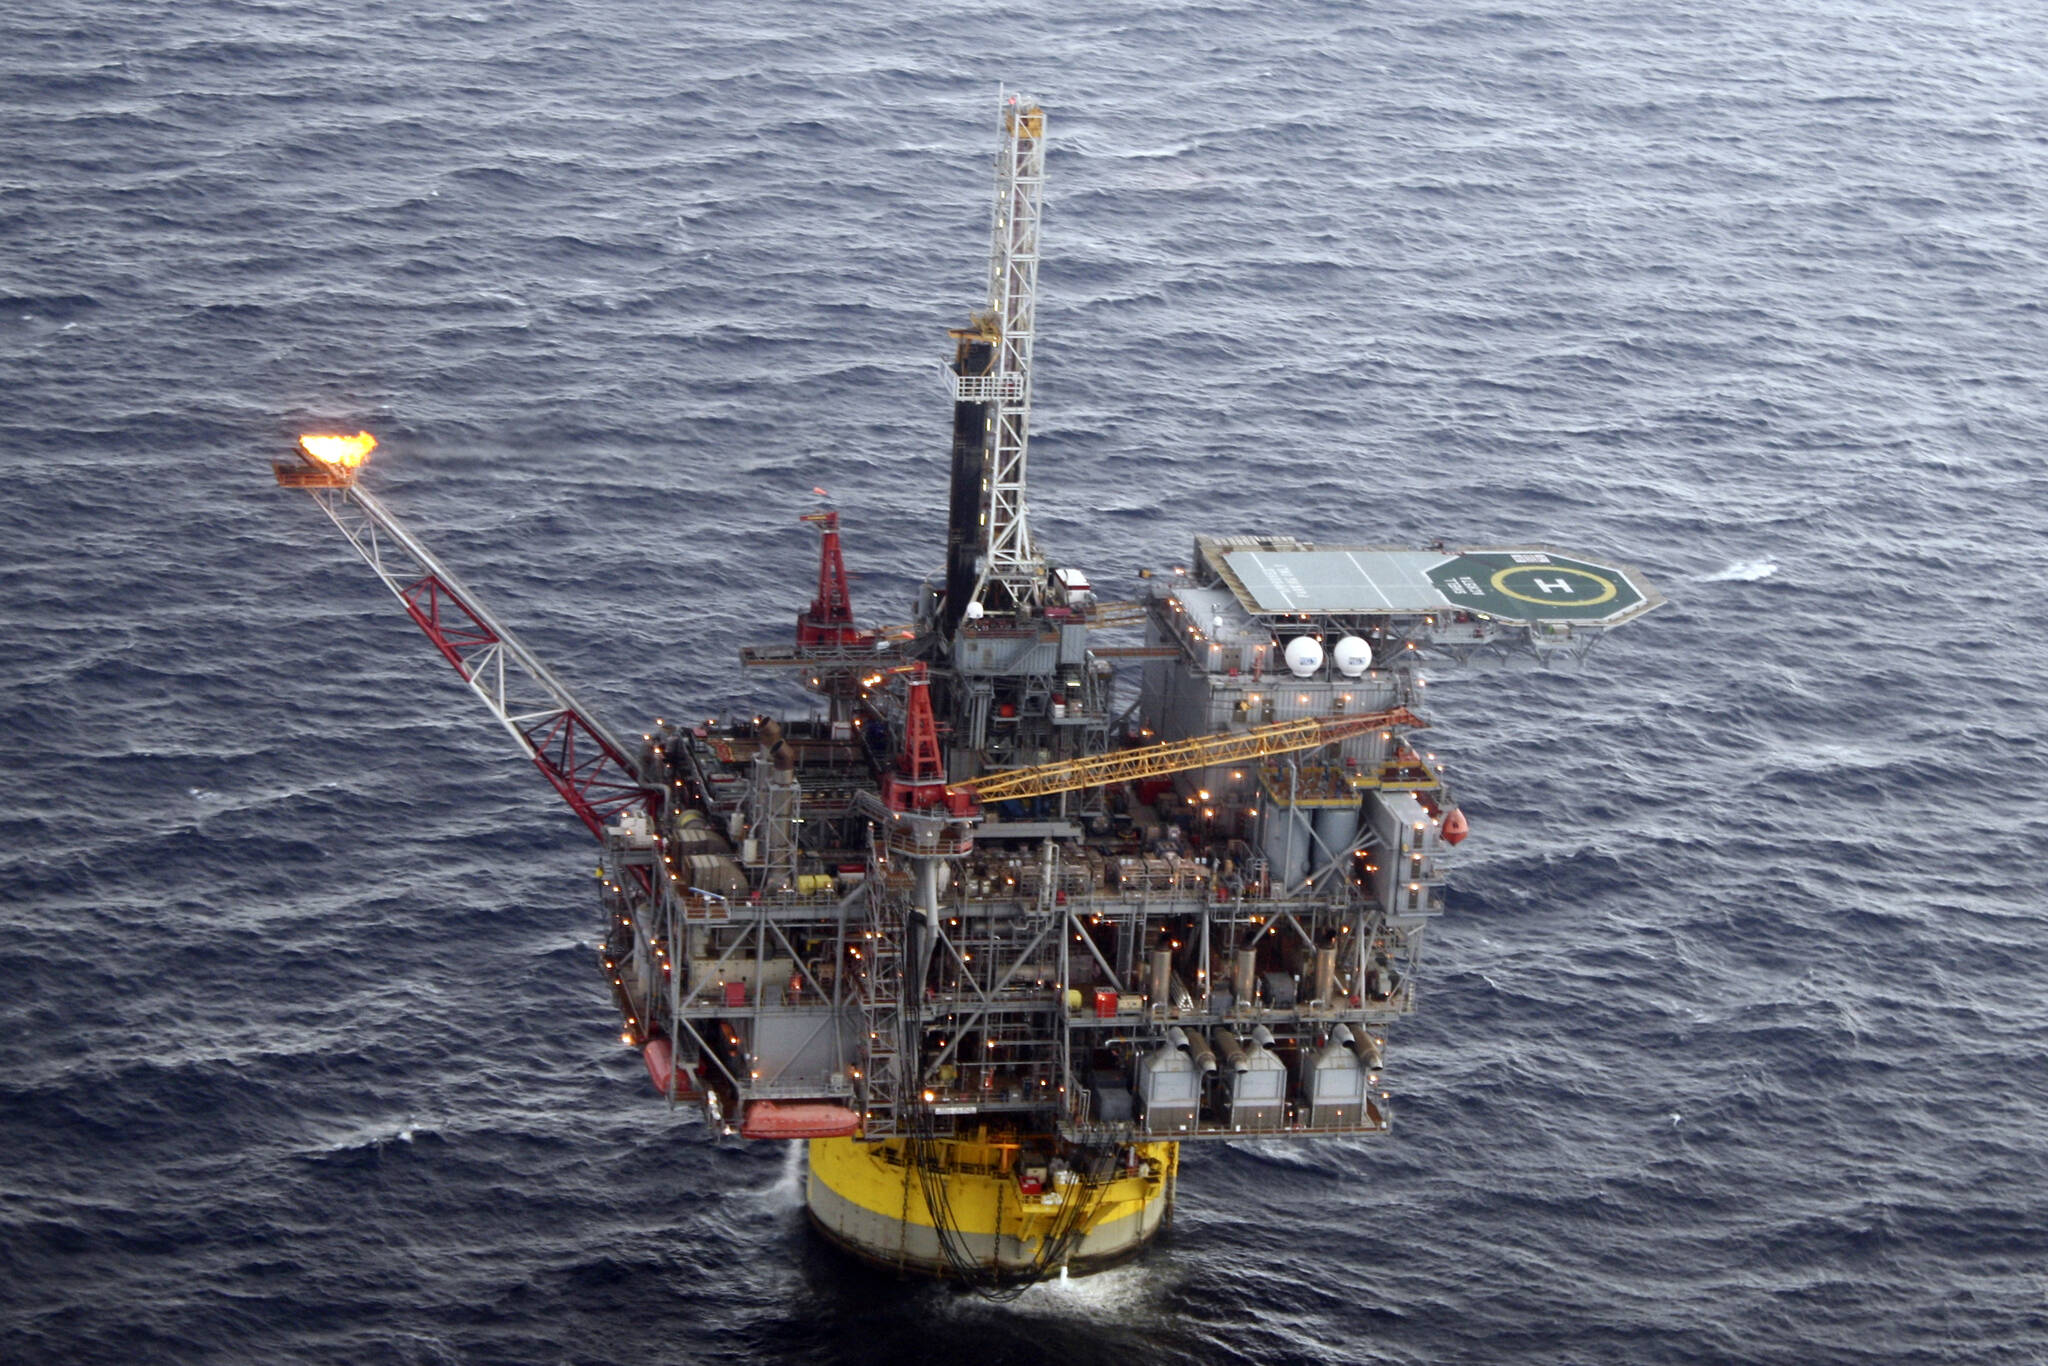 This October 2011 photo, shows the Perdido oil platform located about 200 miles south of Galveston, Texas, in the Gulf of Mexico. The Biden administration is proposing up to 10 oil and gas lease sales in the Gulf of Mexico and one in Alaska over the next five years. The announcement on Friday, July 1, 2022, said fewer lease sales or even zero could occur, with a final decision not due for months. (AP Photo / Jon Fahey)